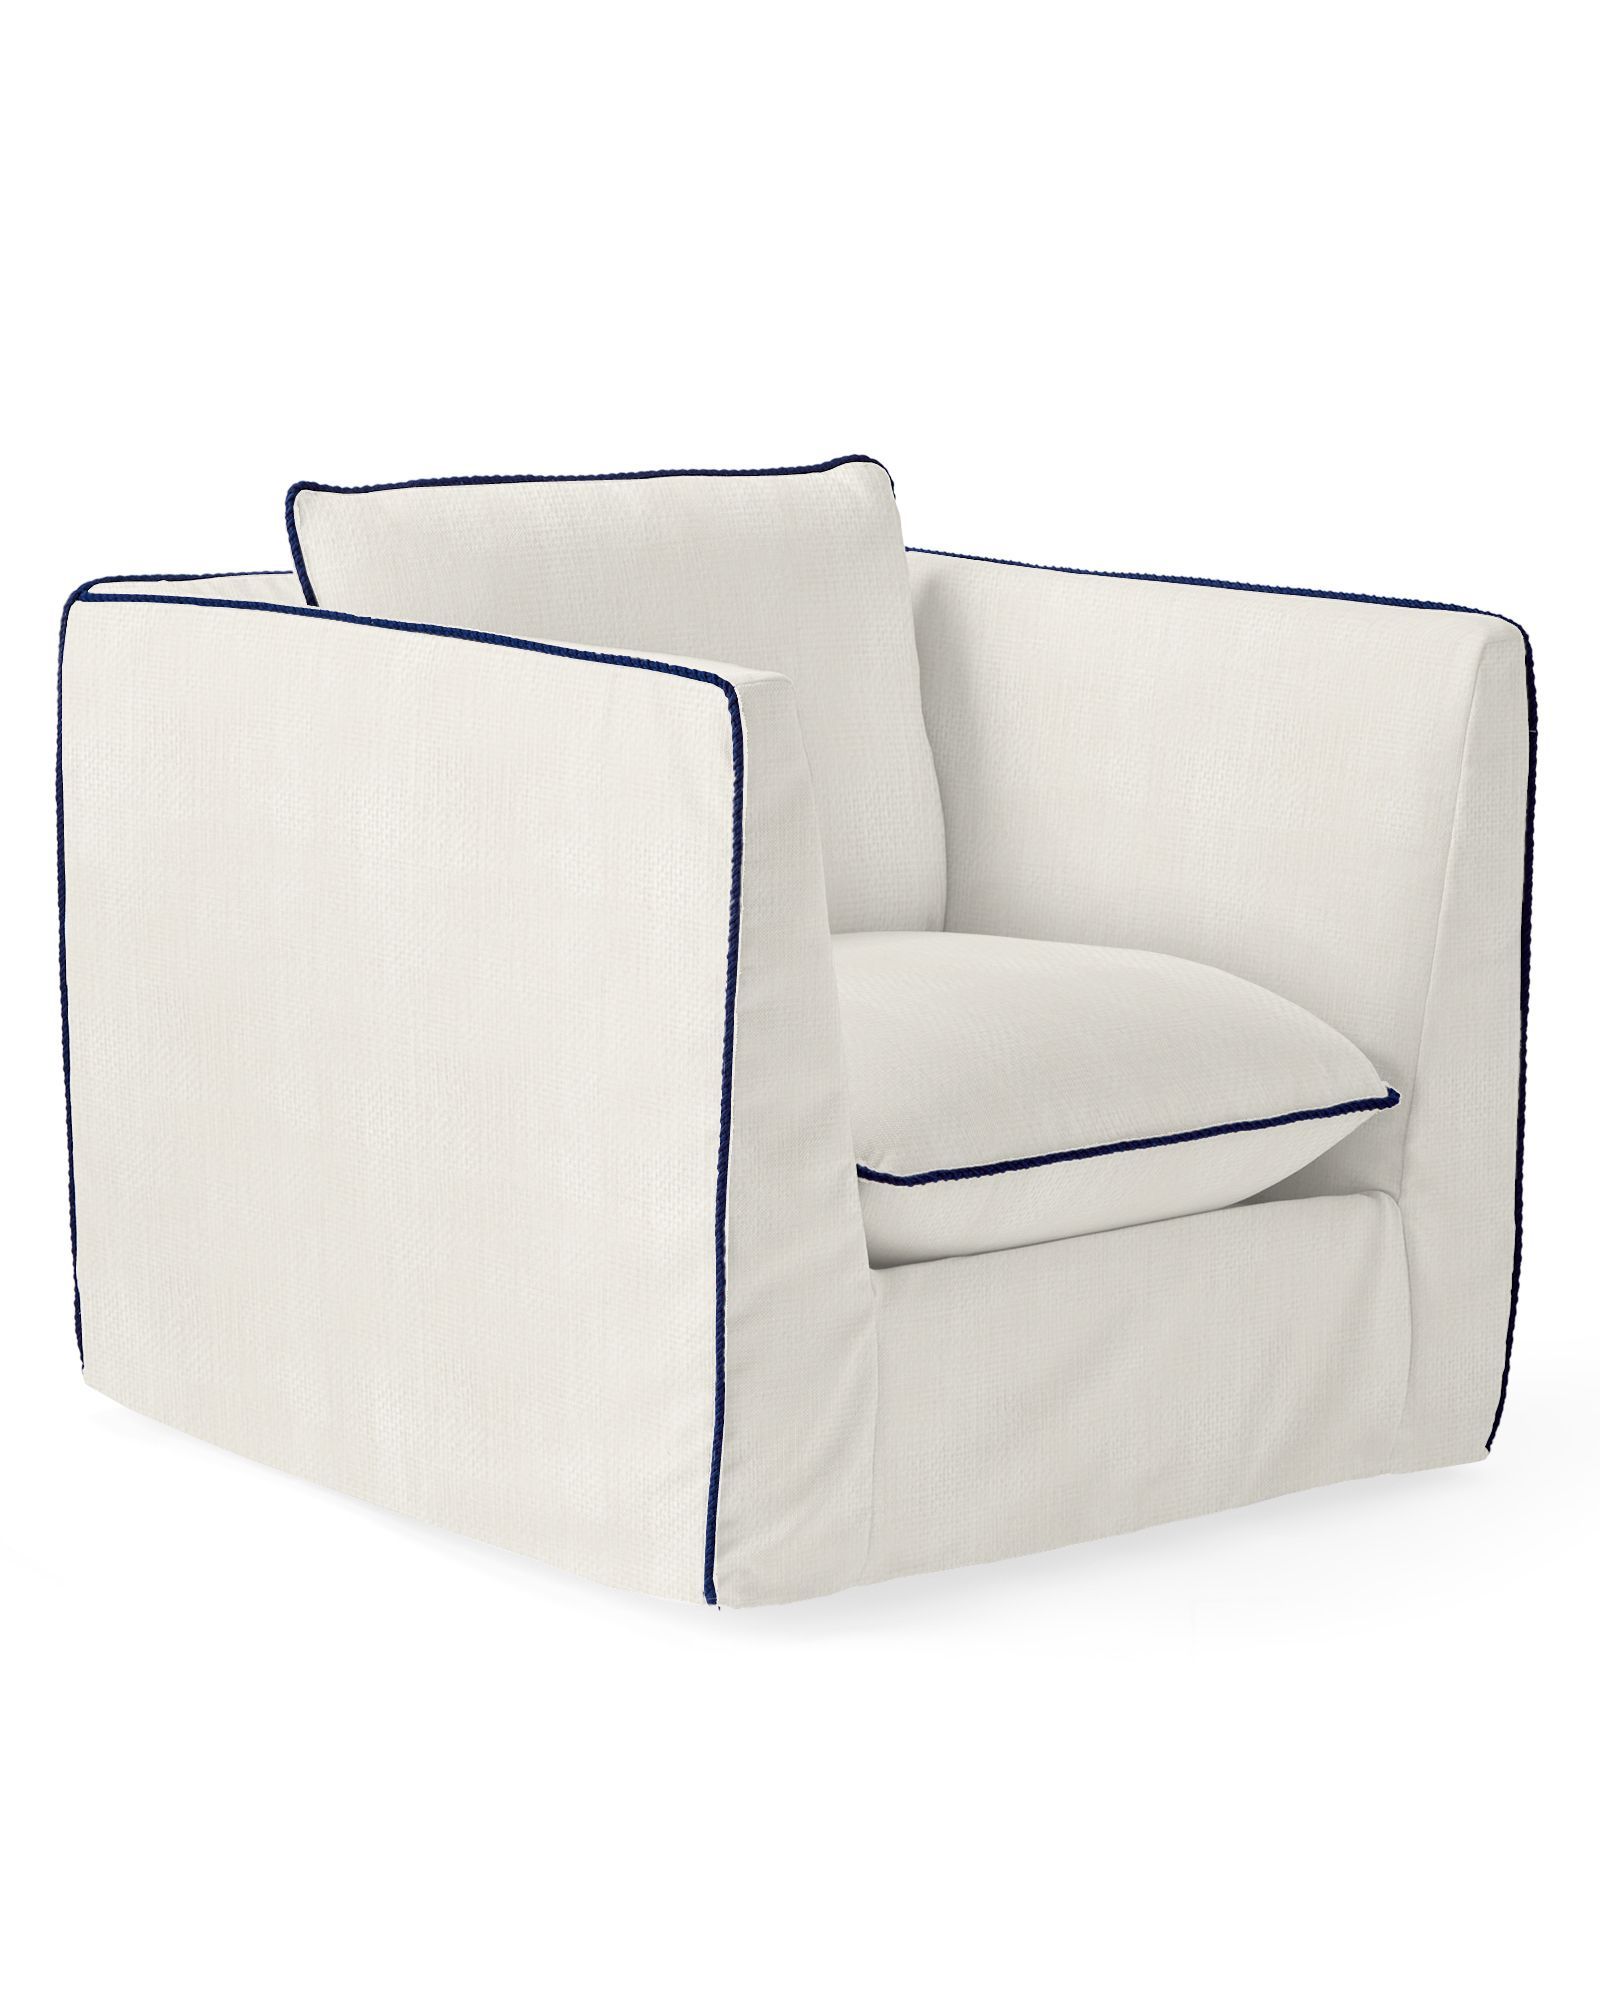 Paros Swivel Chair with Mediterranean Blue Rope Trim | Serena and Lily